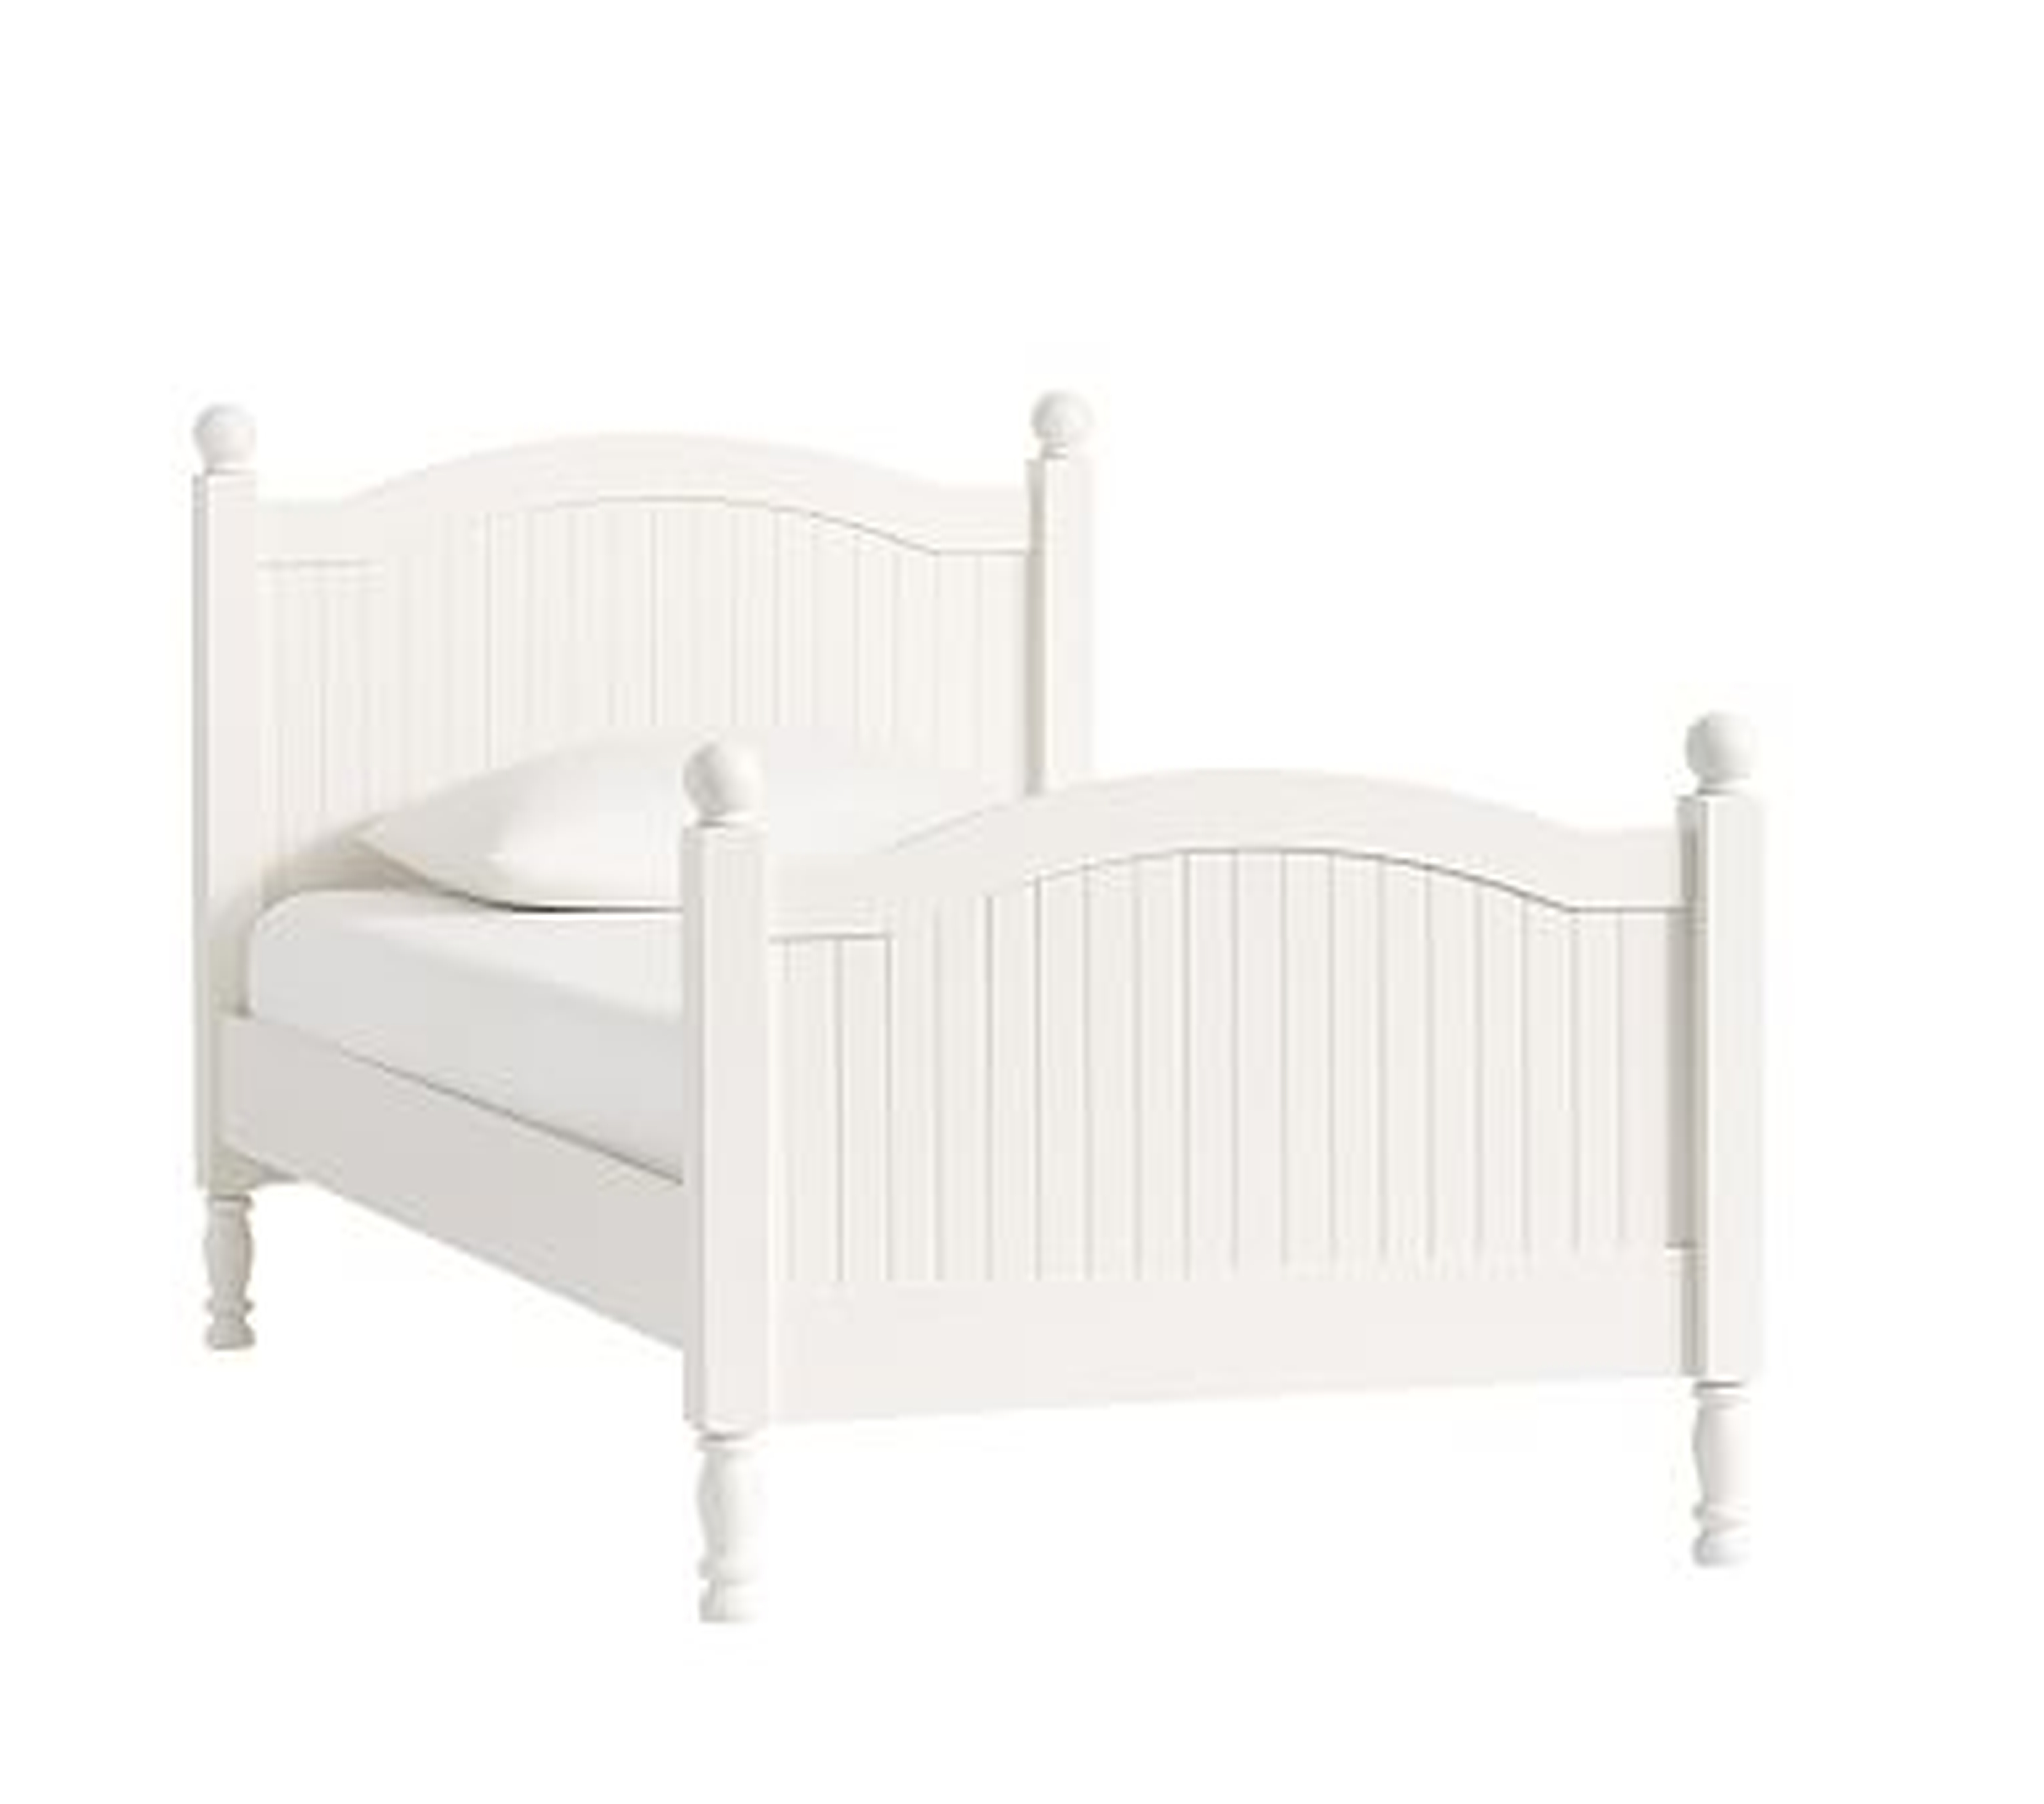 Catalina Bed, Twin, Simply White - Pottery Barn Kids